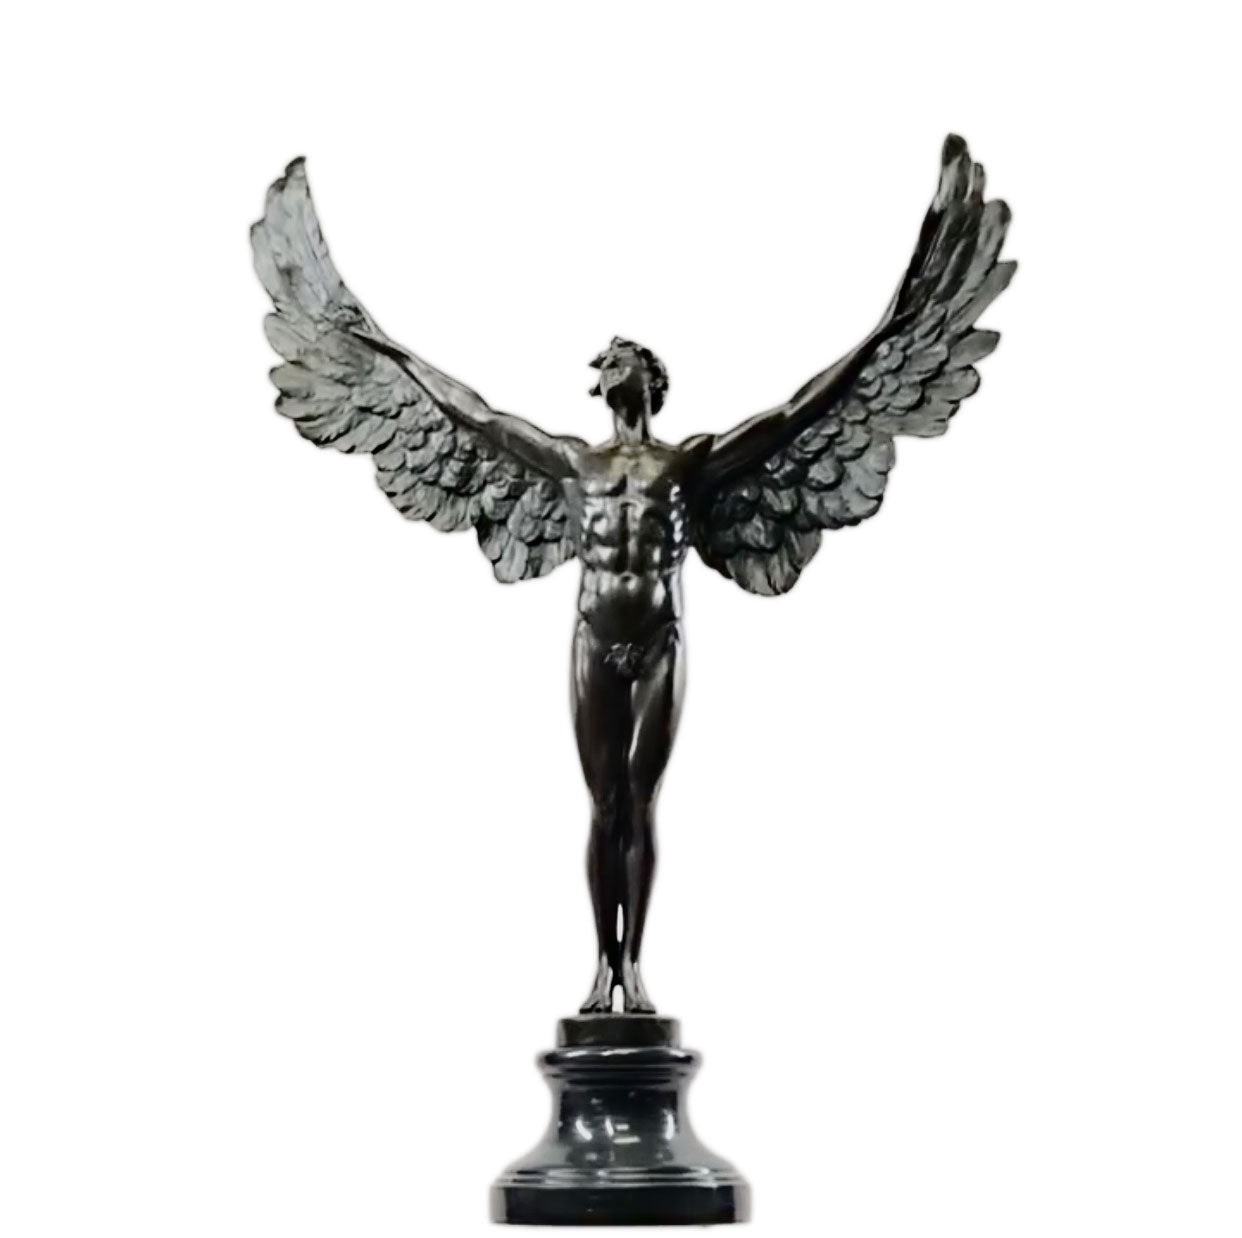 Icarus Mythology Bronze metal statue on marble base 23"wide X 8"deep X 32"tall - Royal Gift